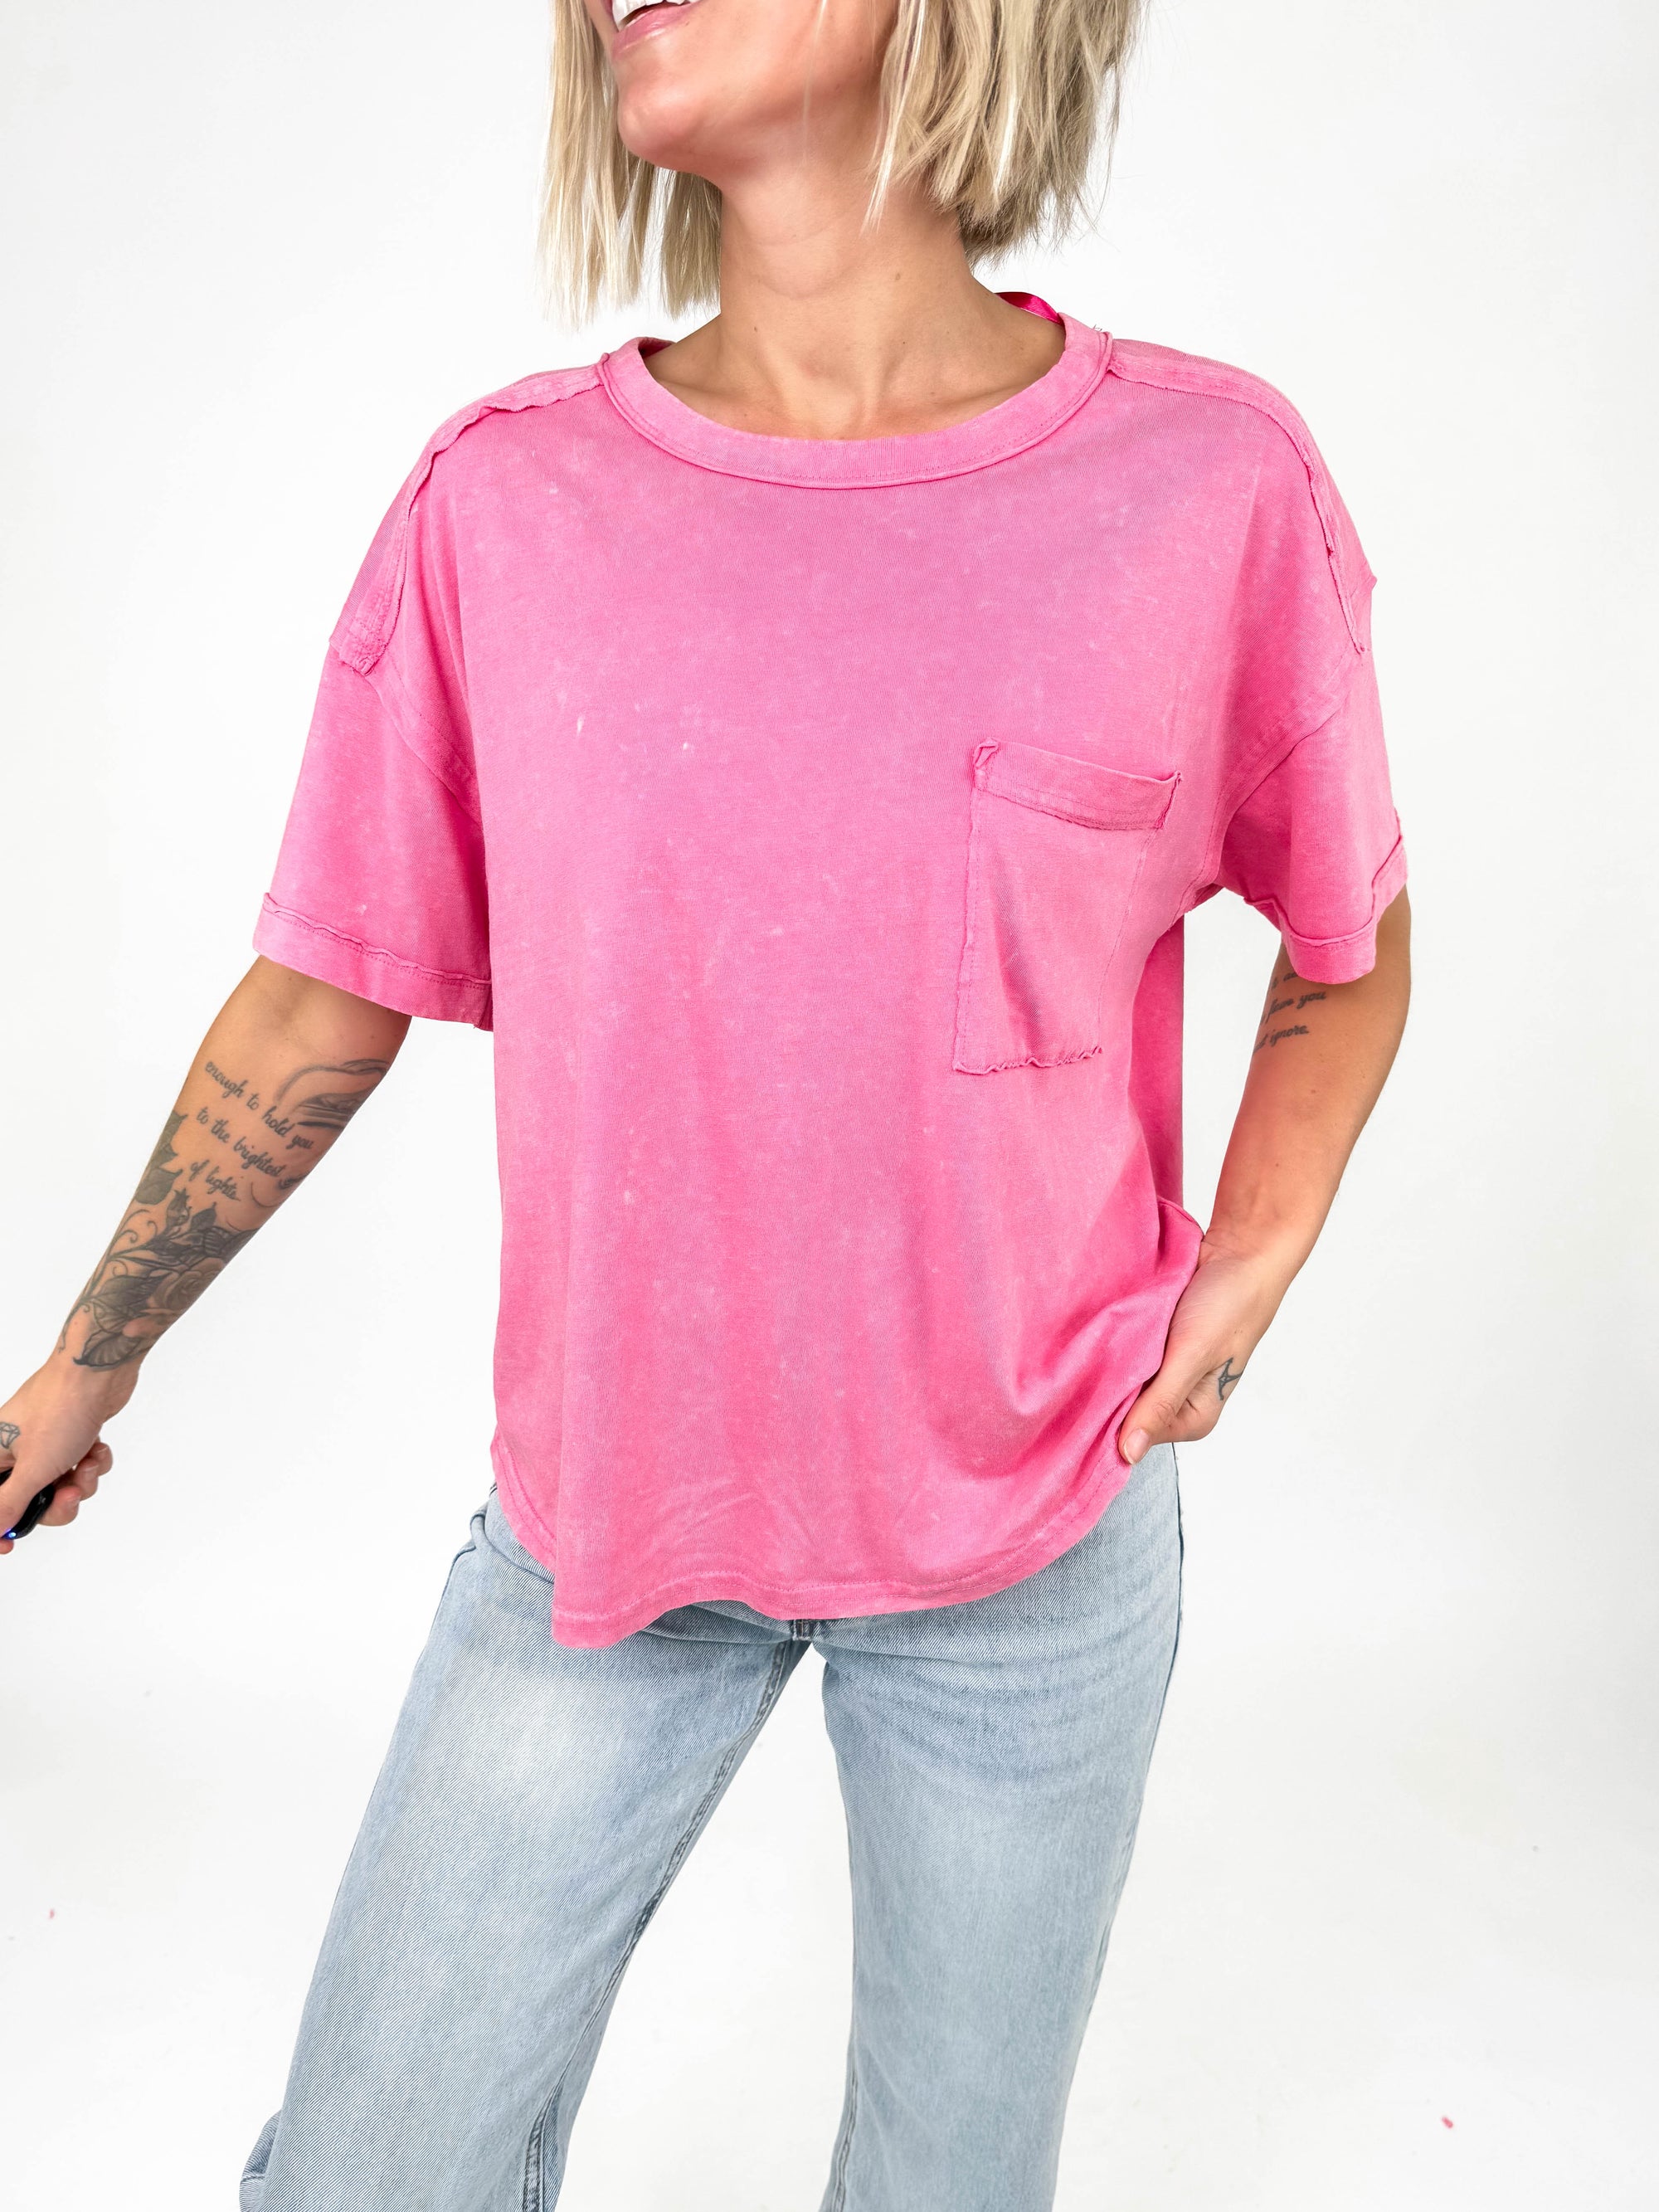 South Beach Washed Pocket Tee- PINK